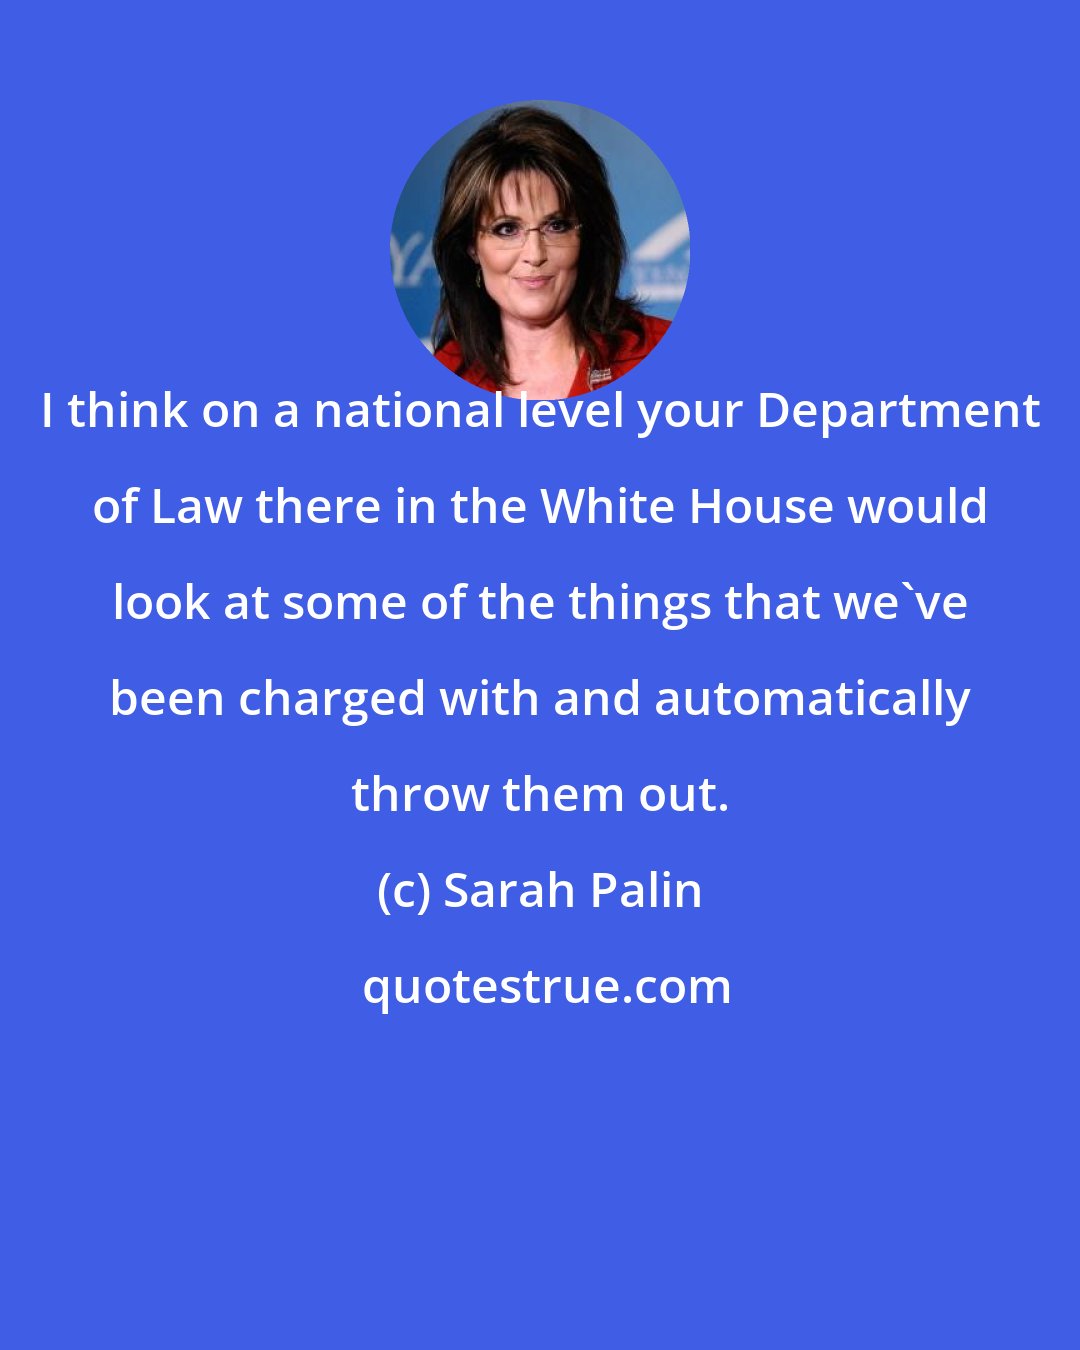 Sarah Palin: I think on a national level your Department of Law there in the White House would look at some of the things that we've been charged with and automatically throw them out.